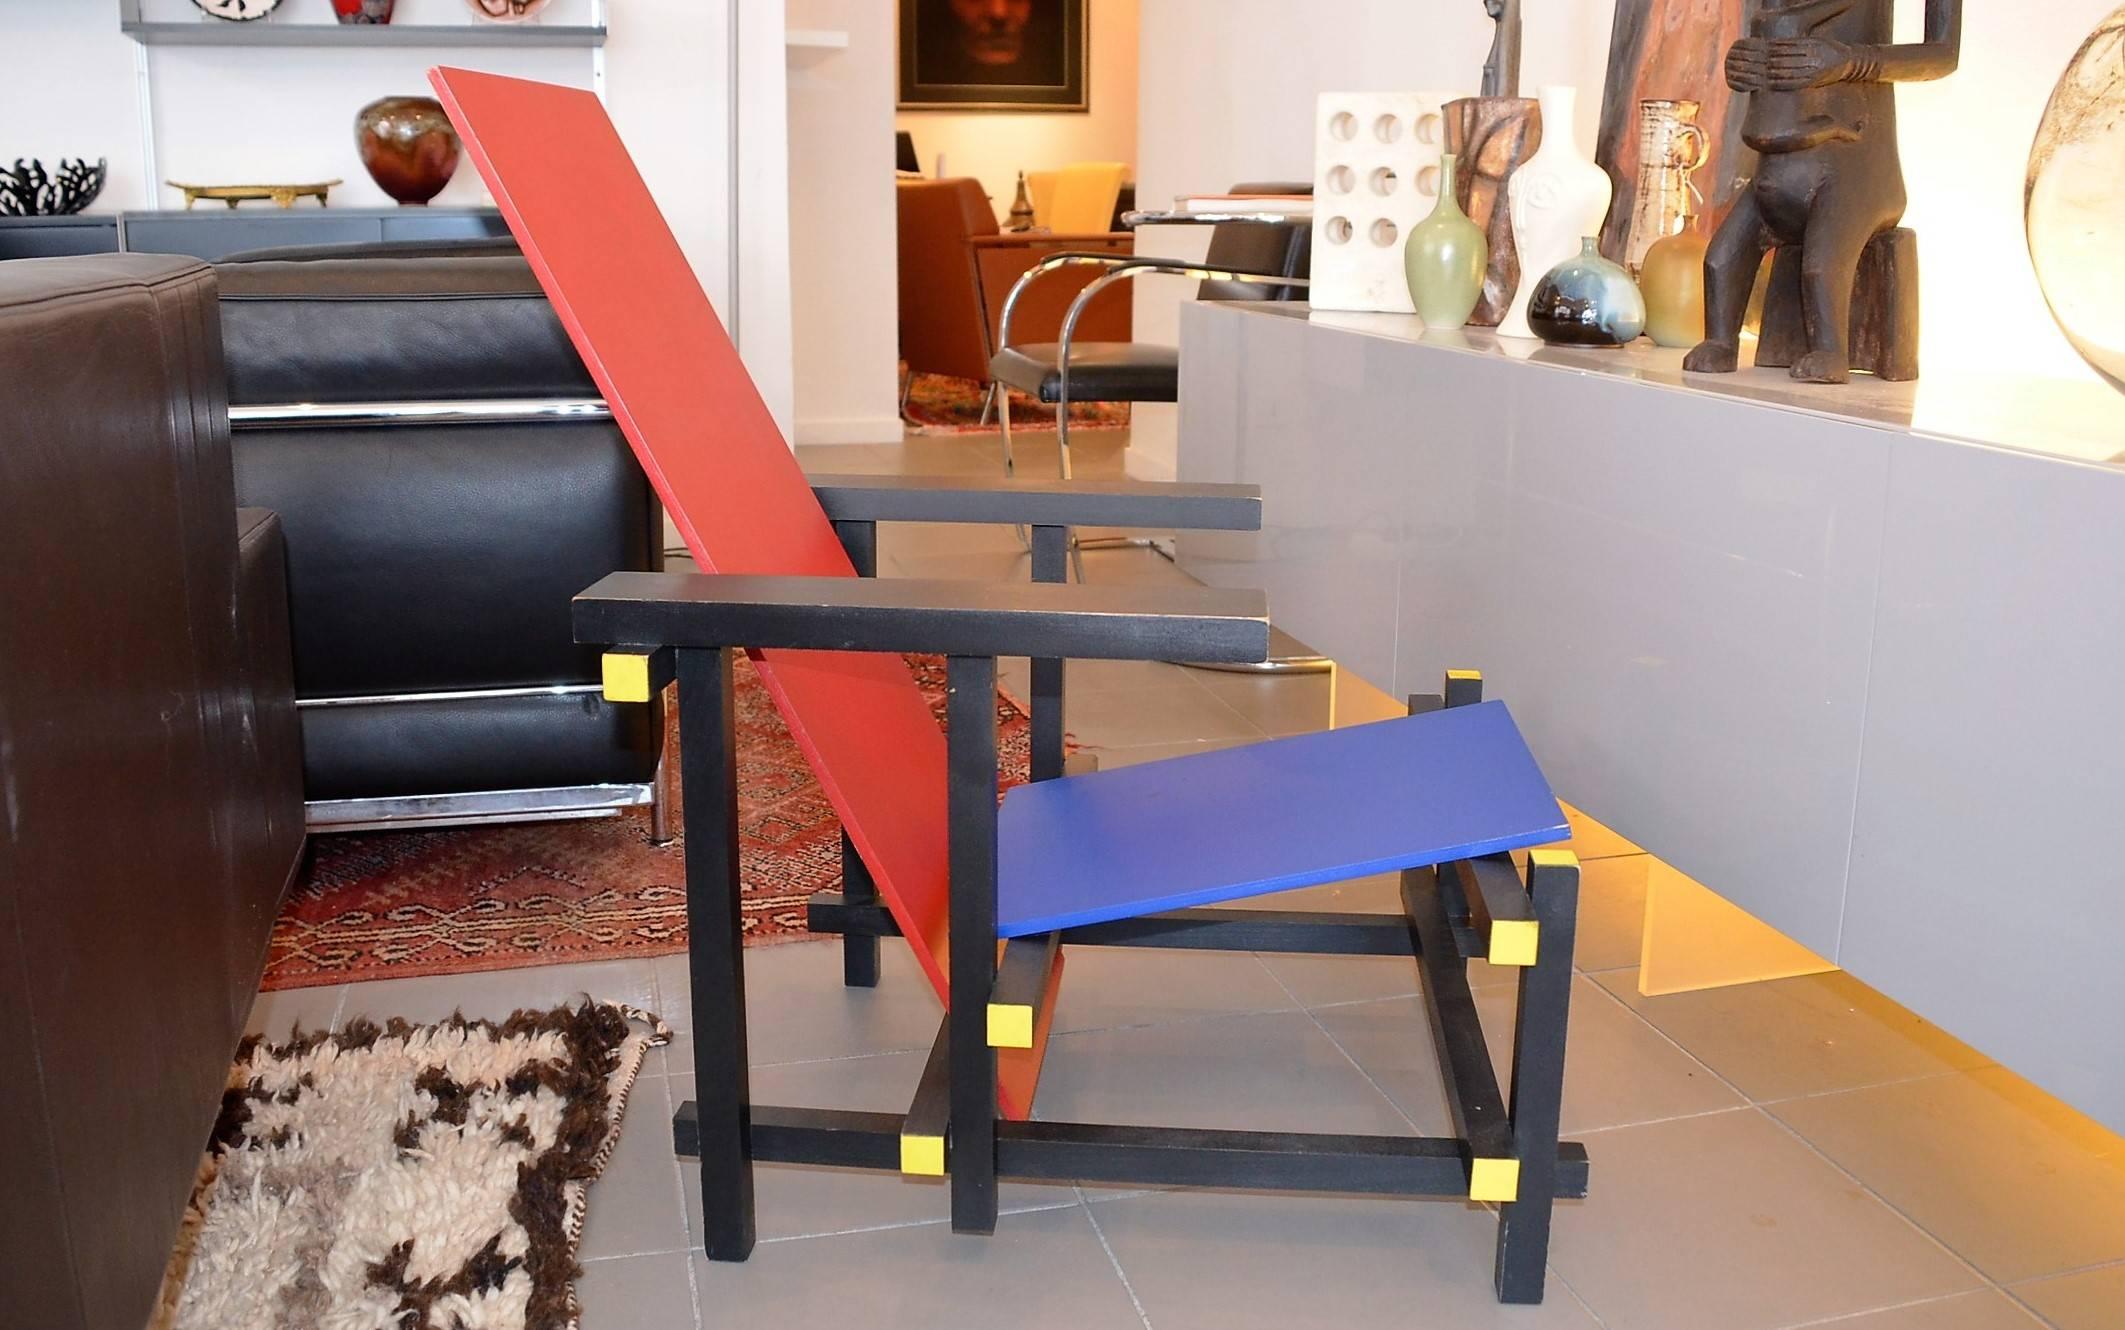 The chair has been designed in natural wood on 1918 by Gerrit Thomas Rietveld, then after meeting with the painter Piet Mondrian primary colors have been added and finally the black was added in 1923. 
Thus, its structure is colored in black, his